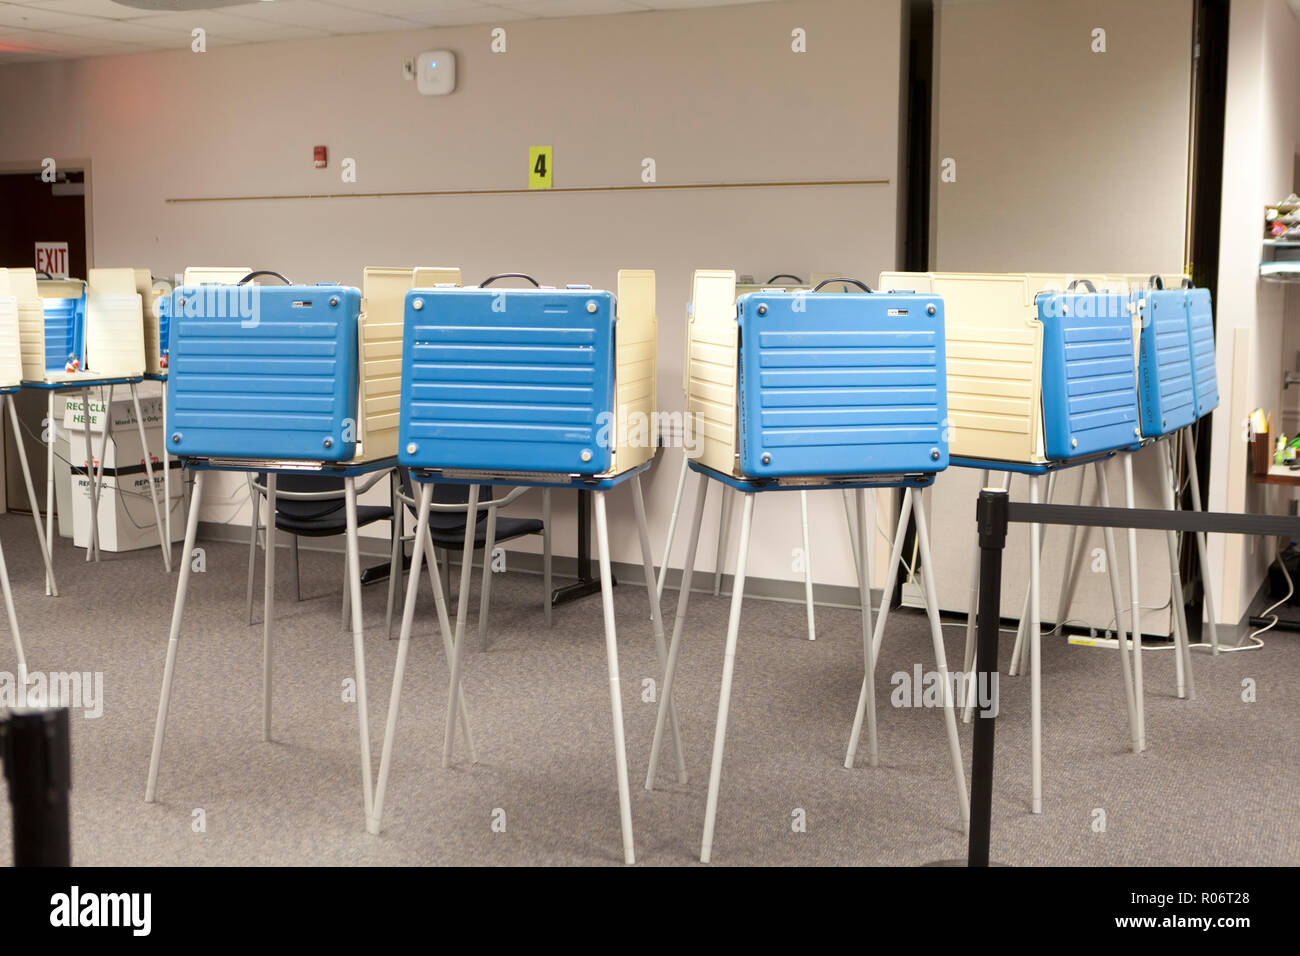 Empty voting booths during the 2018 midterm elections - Virginia, USA Stock Photo